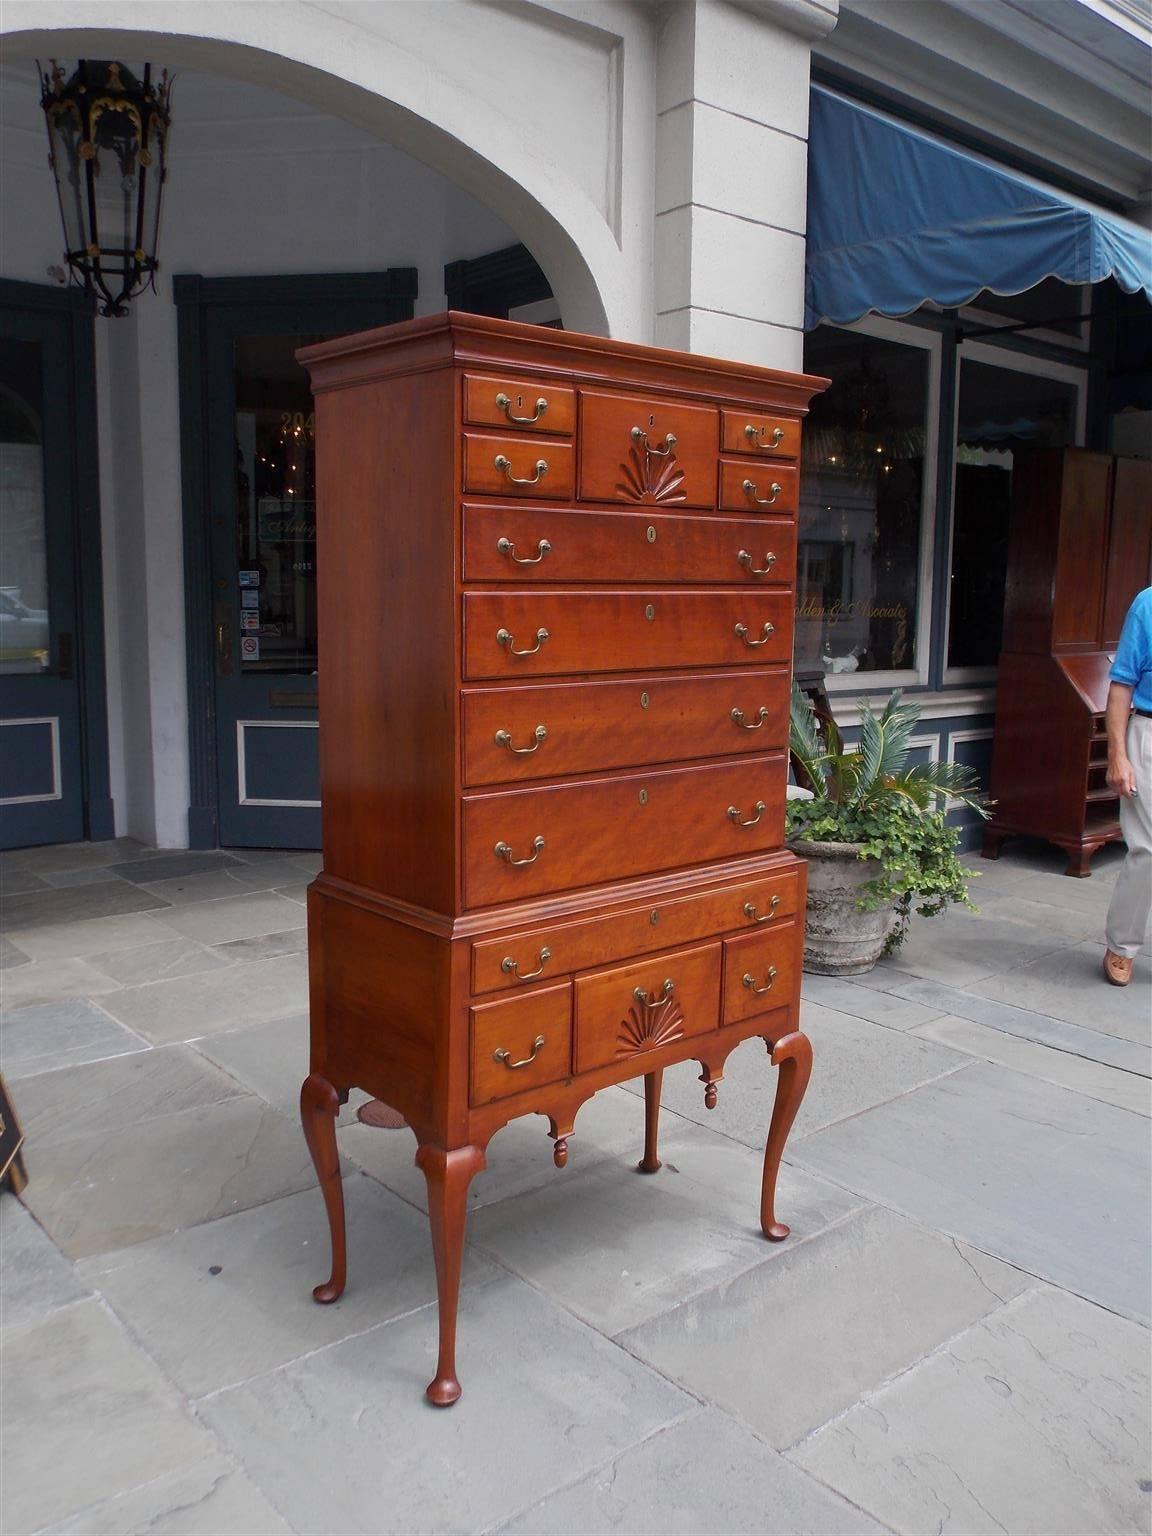 American Queen Anne cherry flat top highboy with a molded edge cornice, two flanking upper case drawers with a centered fan carved drawer and four lower graduated drawers retaining the original brasses. Lower case has a carved molded edge with a